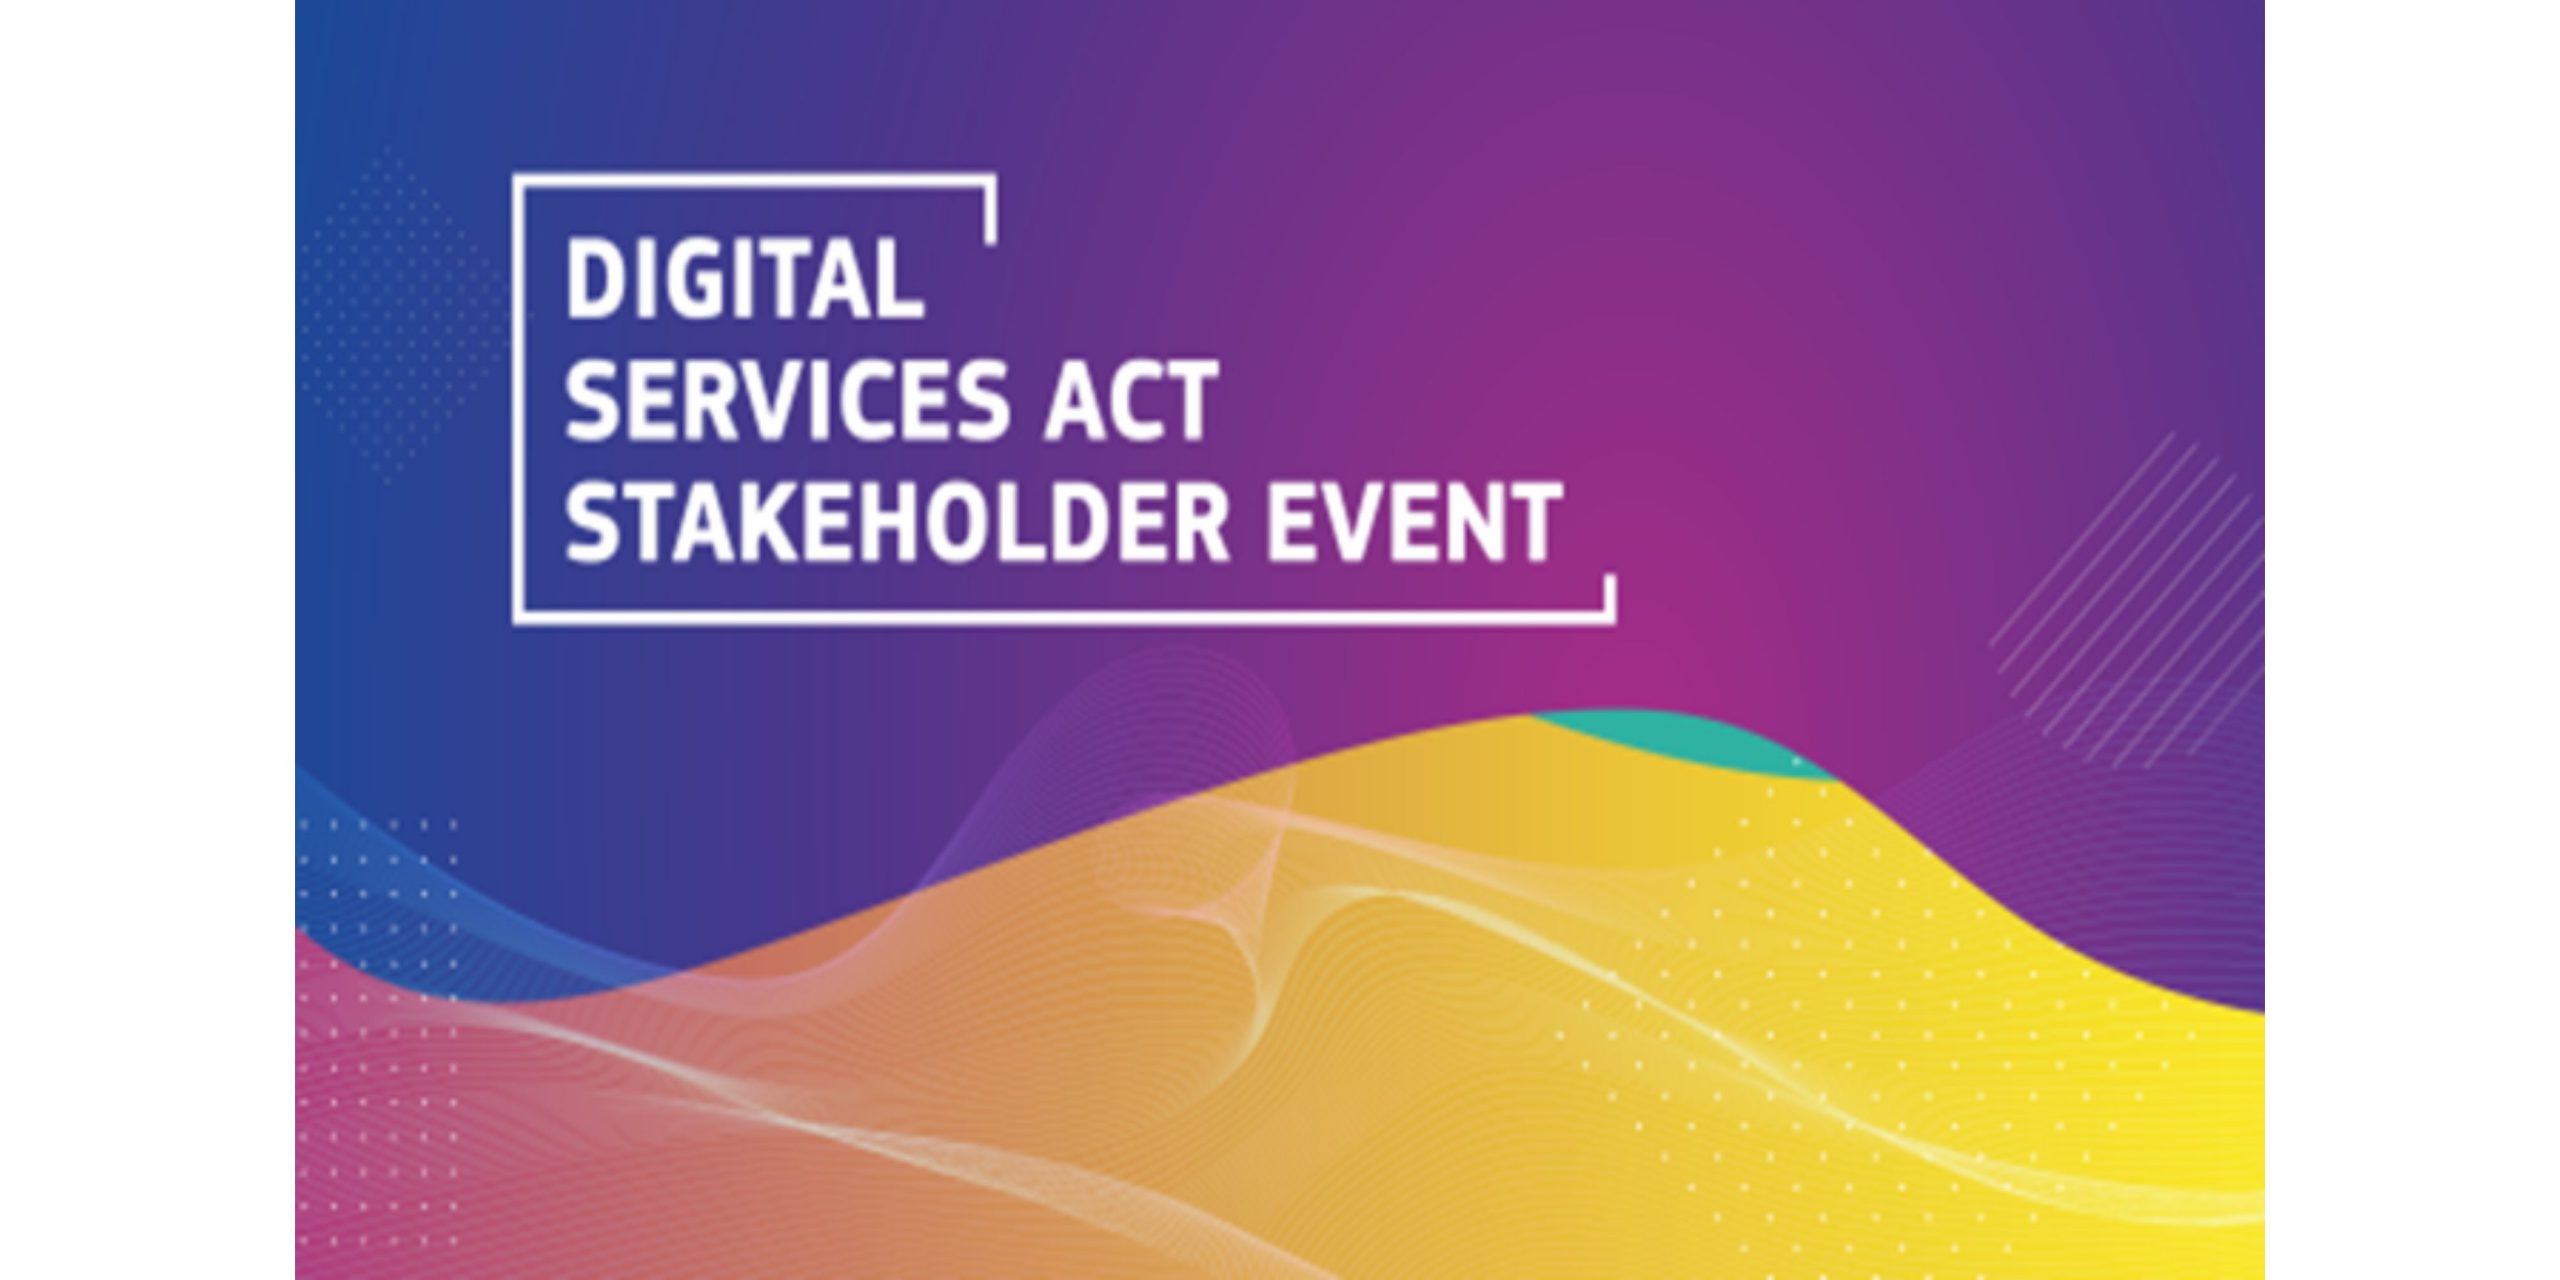 Digital Services Act Registration now open for stakeholder event